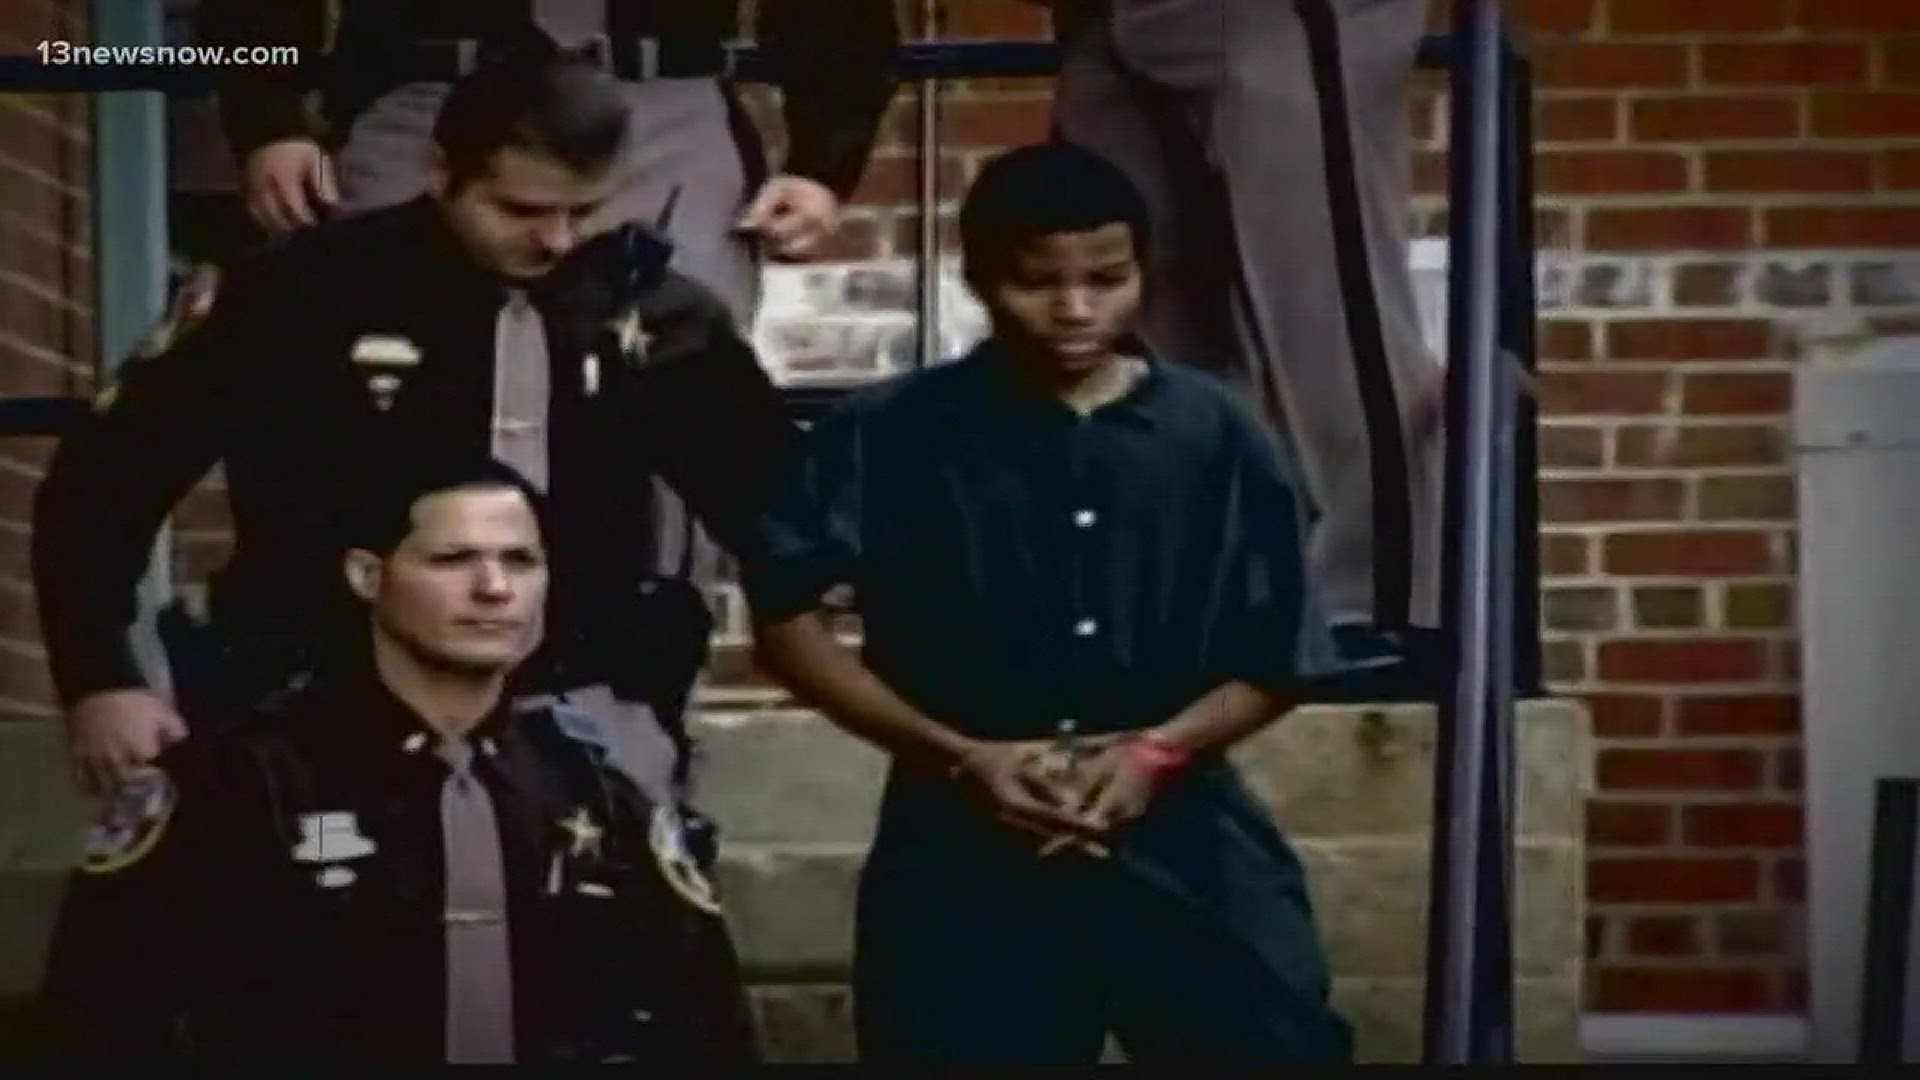 Lee Boyd Malvo was only 17 when he and 42 year old John Allen Muhammad were convicted of killing 10 people in Maryland, Virginia and Washington, D-C.